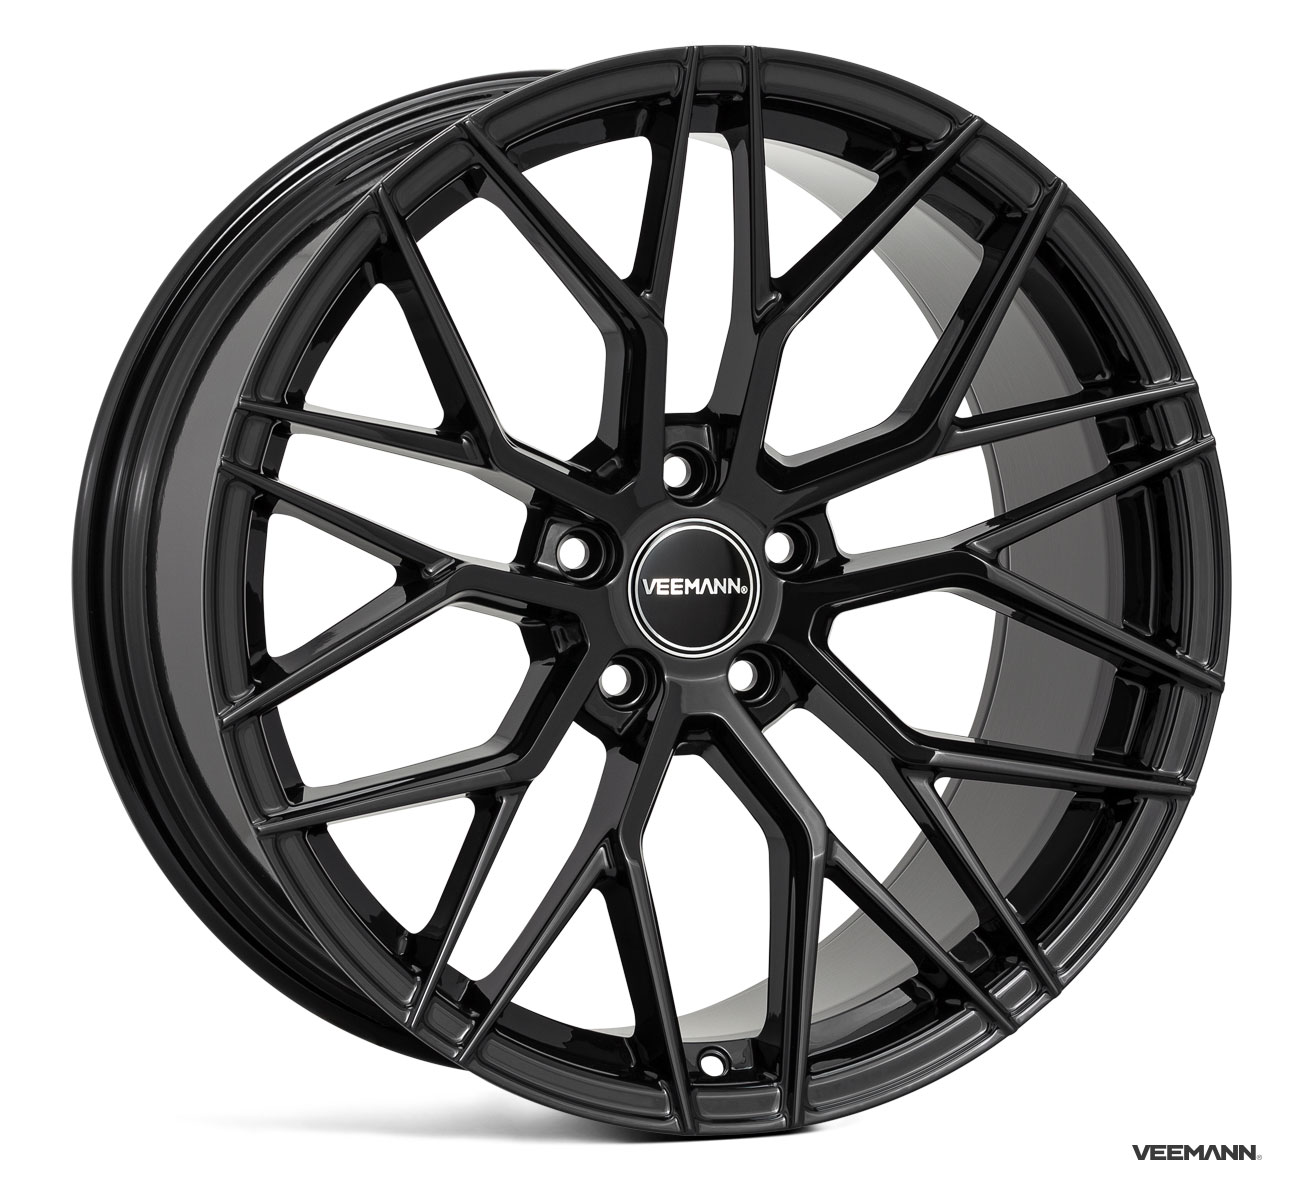 NEW 22" VEEMANN VC520 ALLOY WHEELS IN GLOSS BLACK WITH WIDER 11" OR 12" REARS